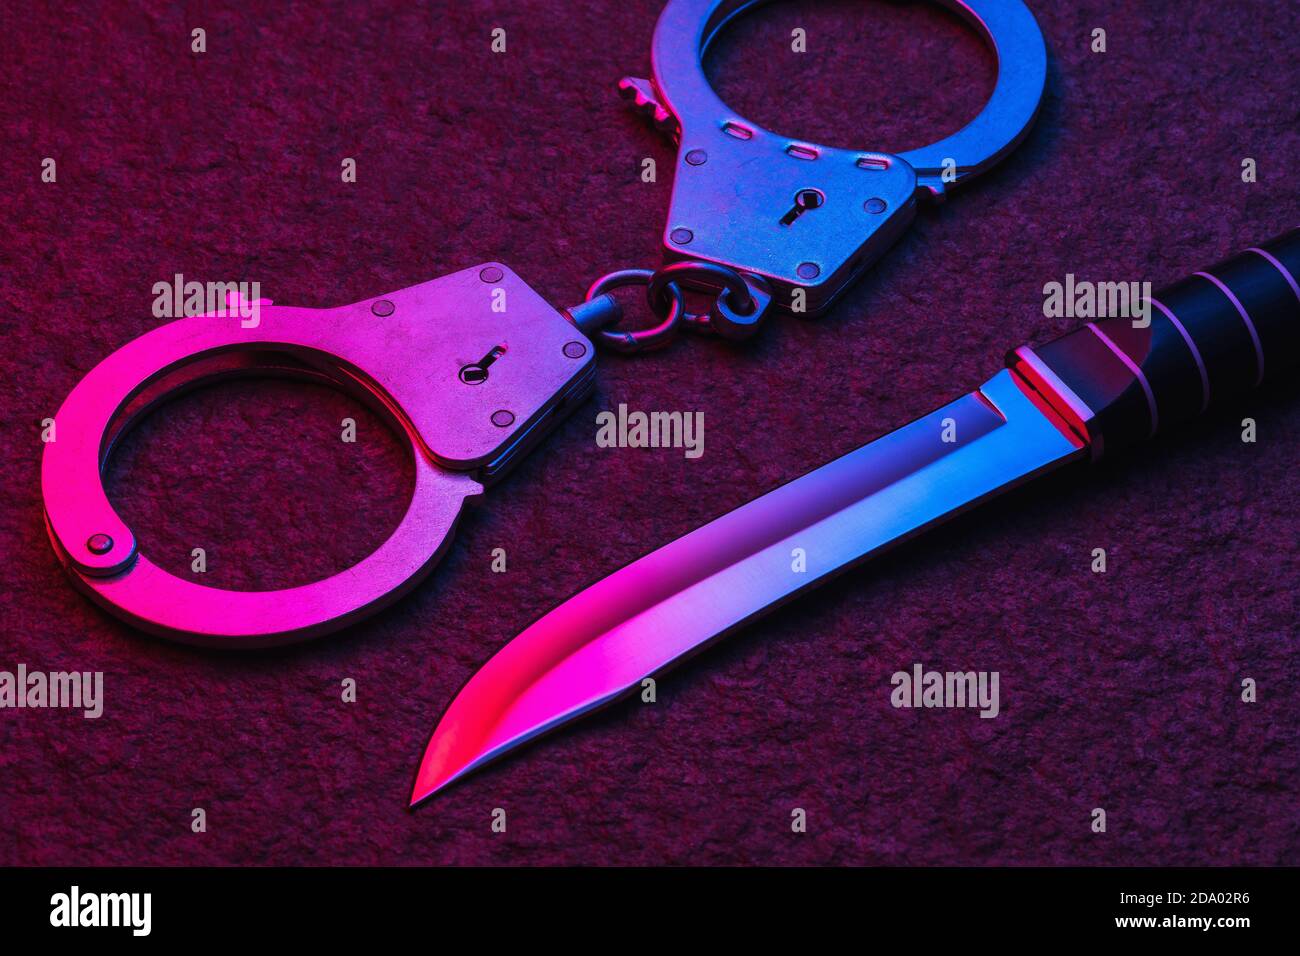 Handcuffs and a knife on a stone surface illuminated with multi-colored light. Concept on the topic of punishment for a committed crime Stock Photo